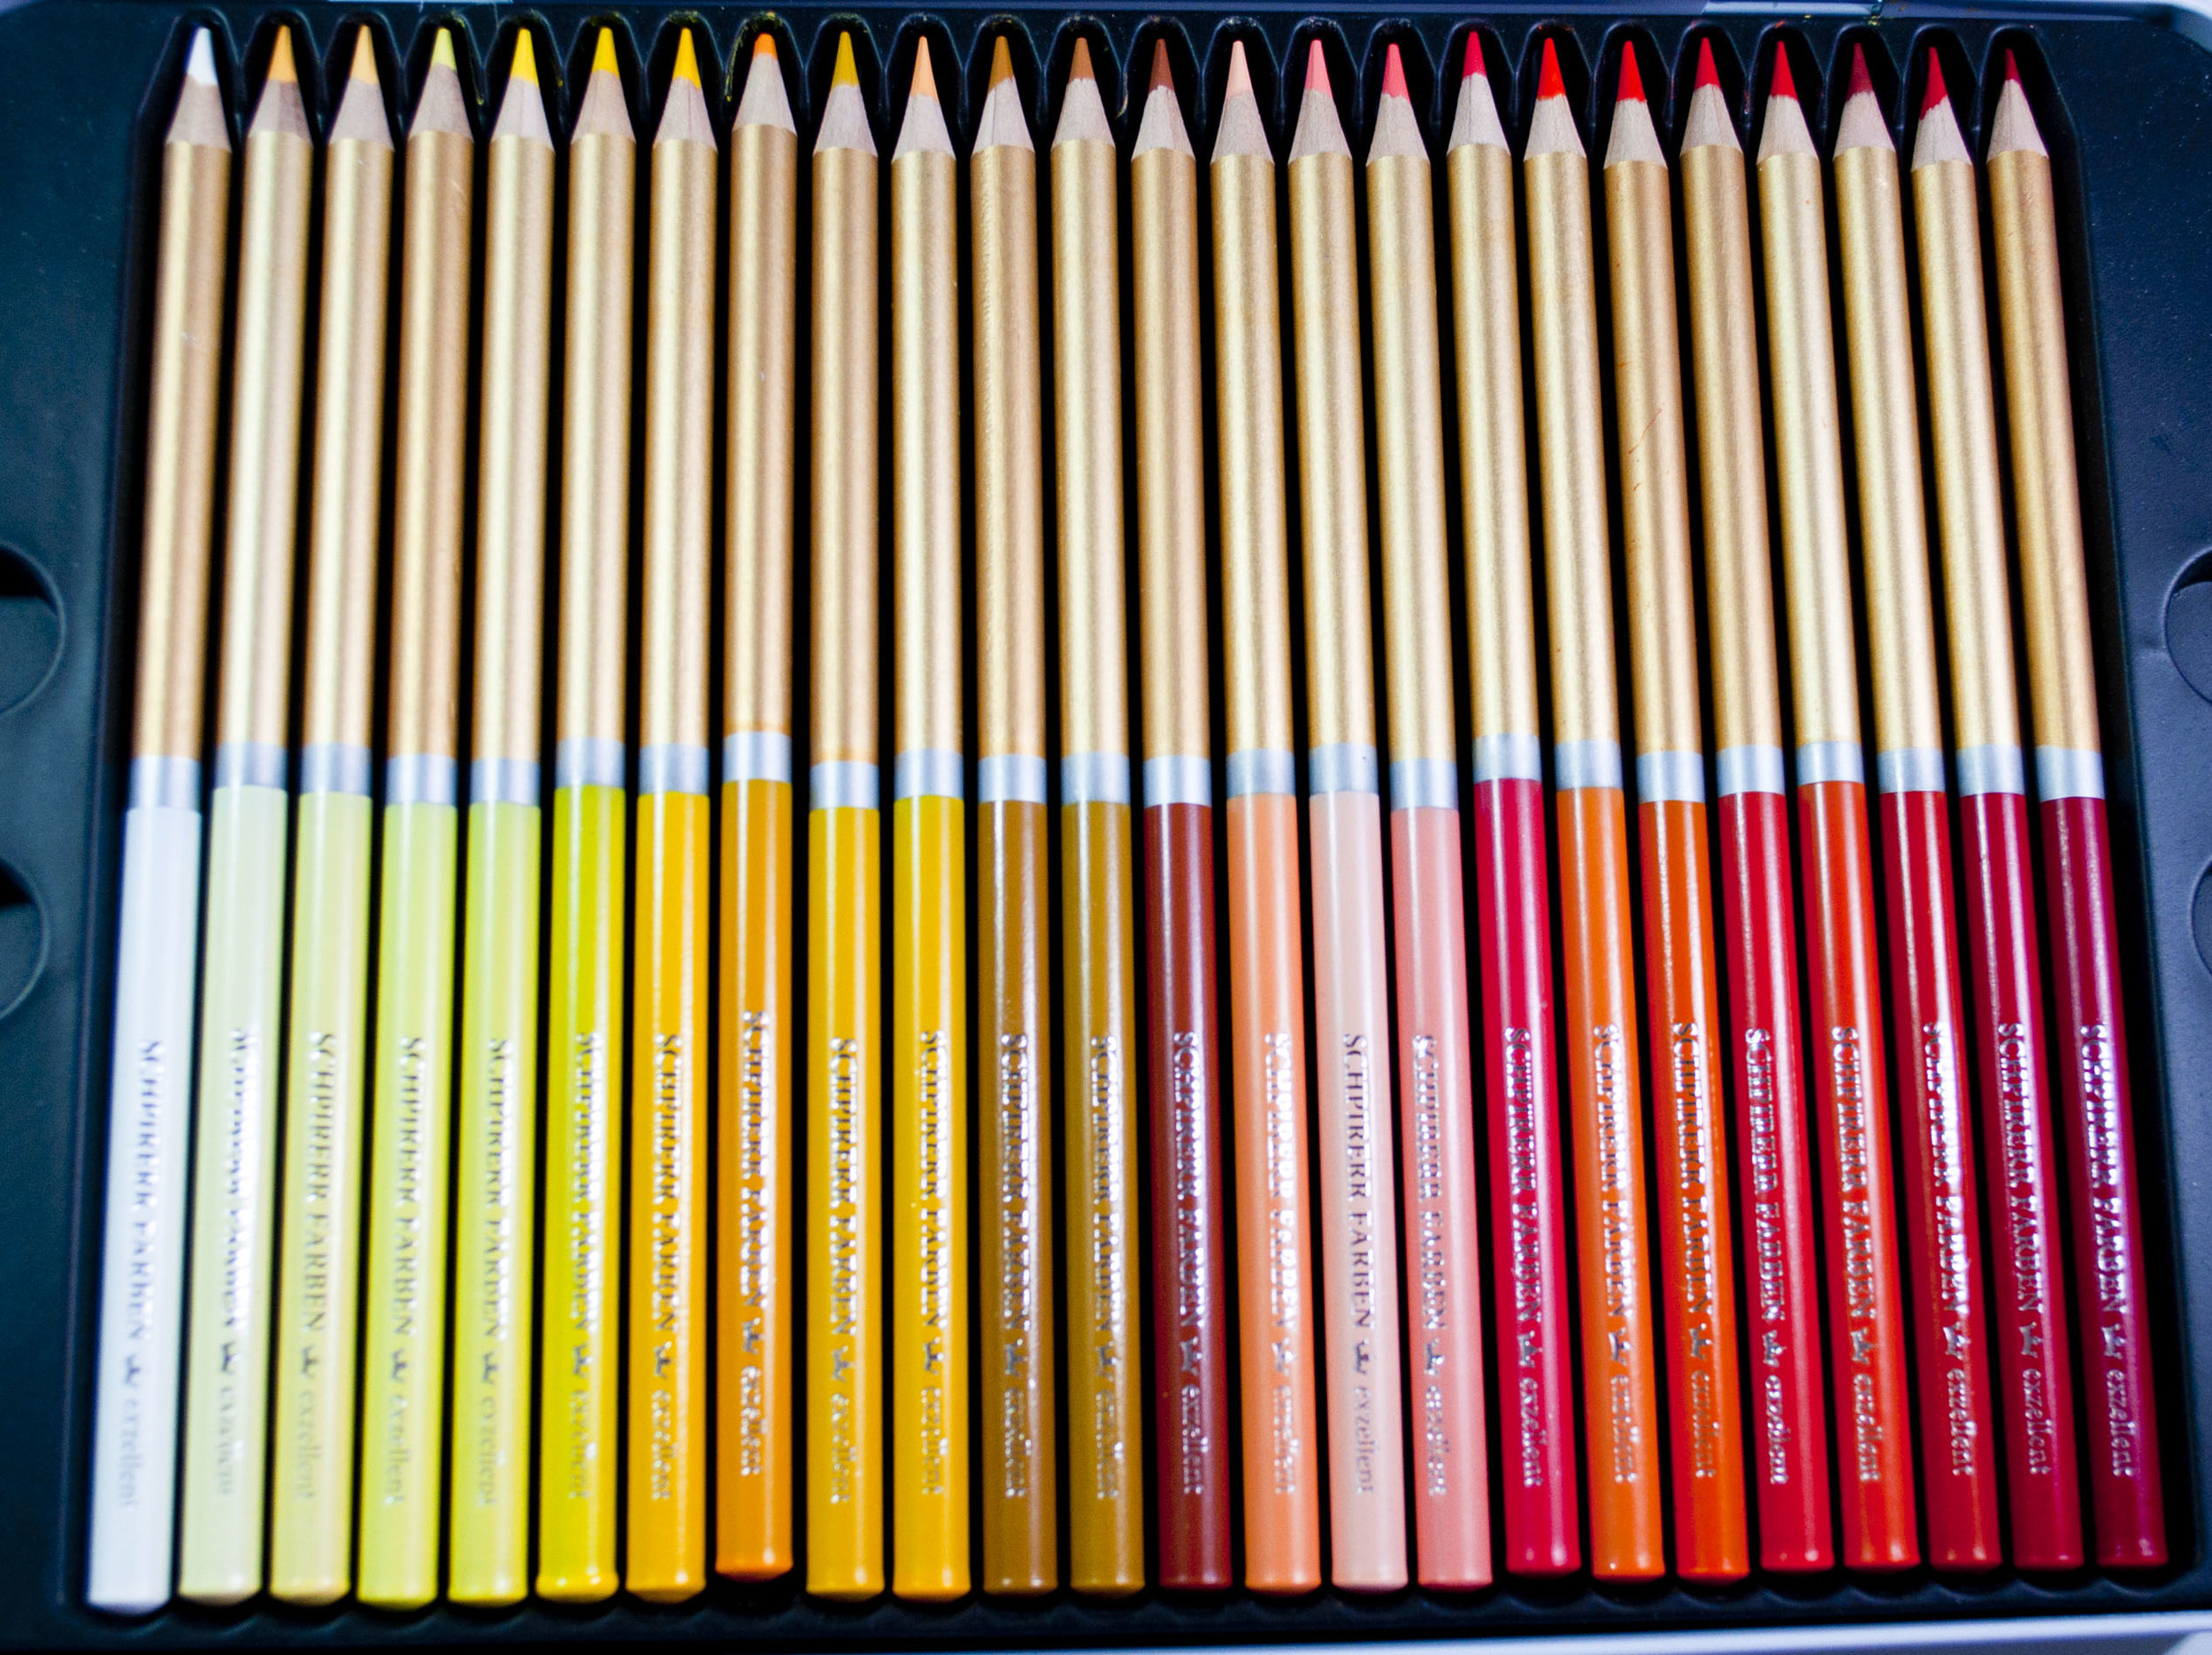 Professional Premium Numbered 72 Colored Pencils Set Schpirerr